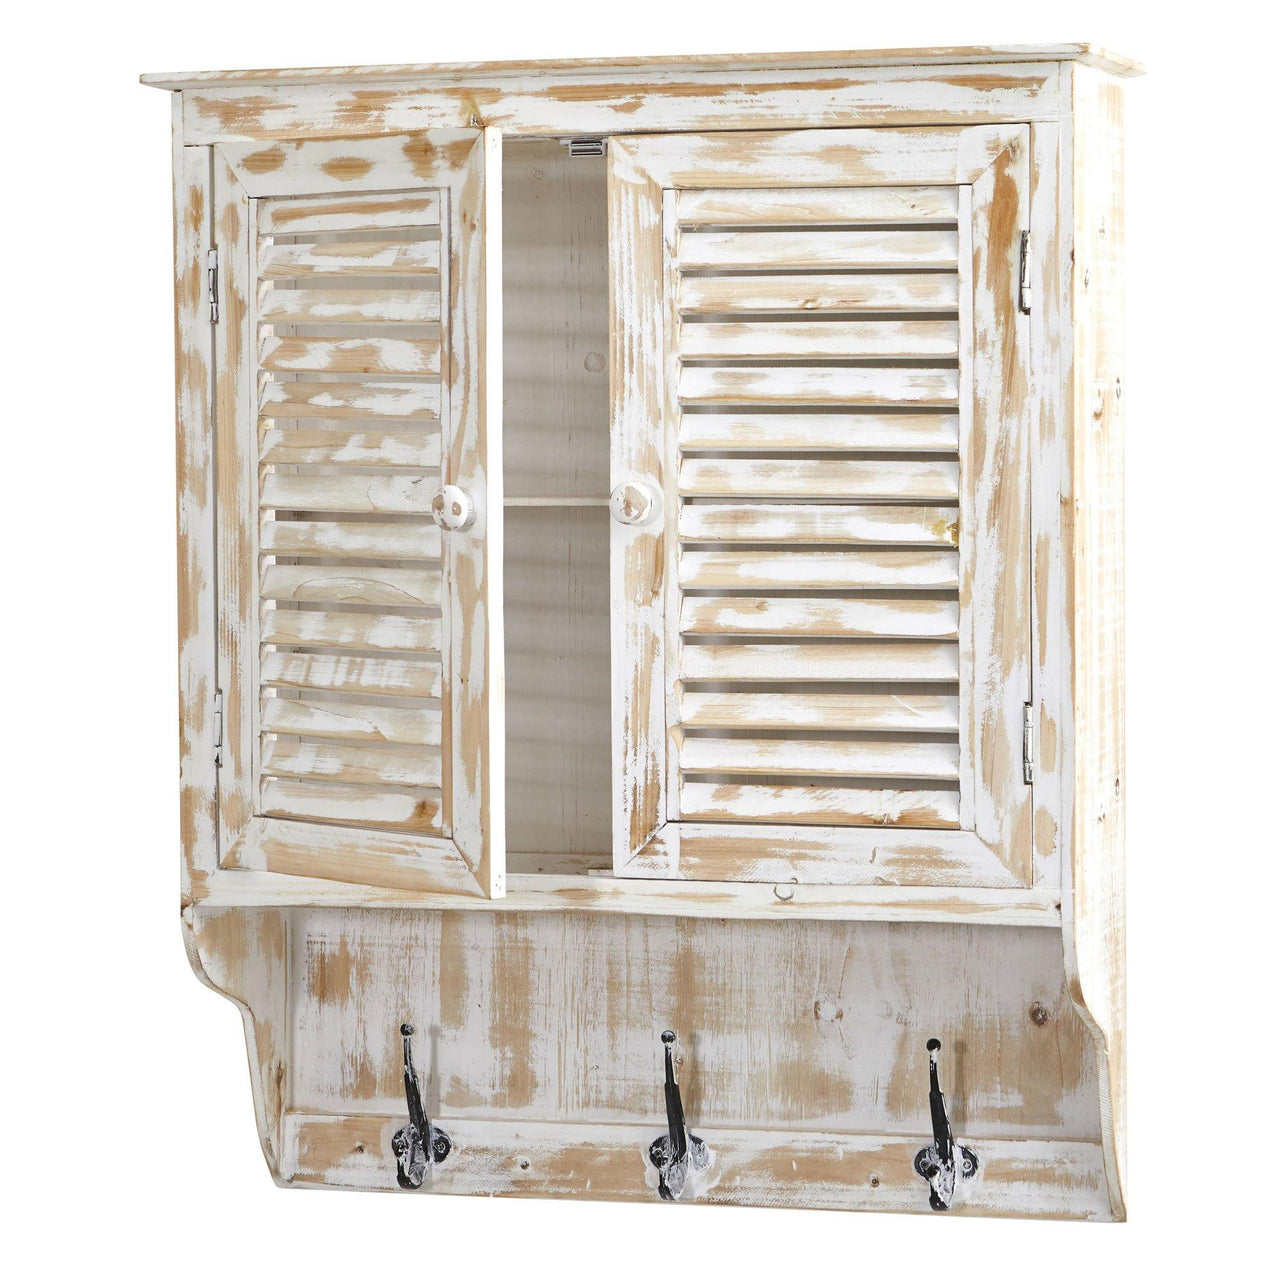 32” White Washed Wall Cabinet With Hooks - The Fox Decor